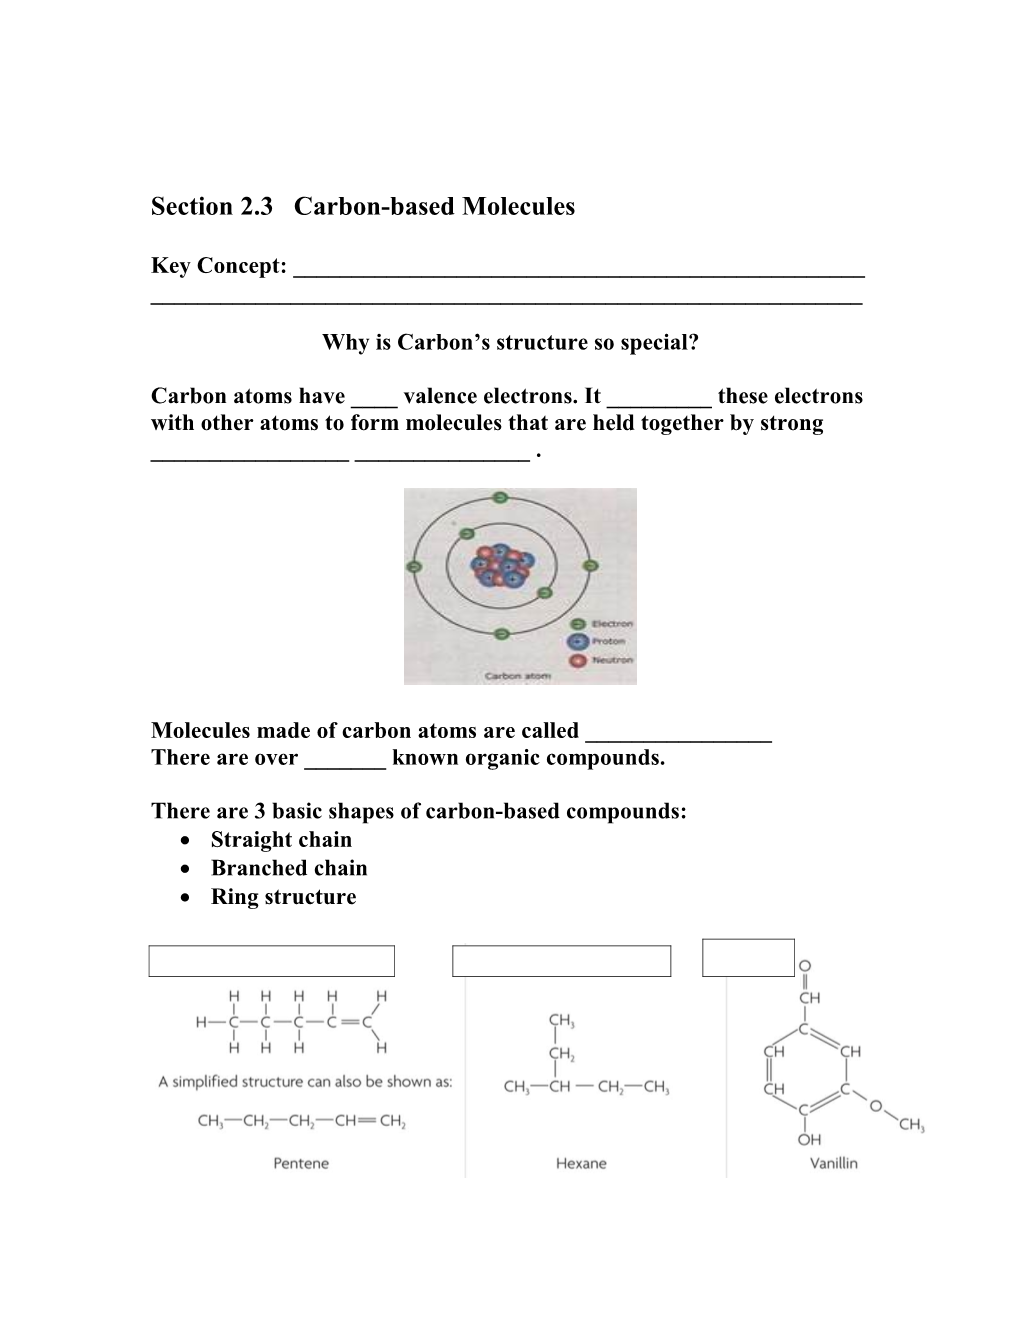 Section 2.3 Carbon-Based Molecules